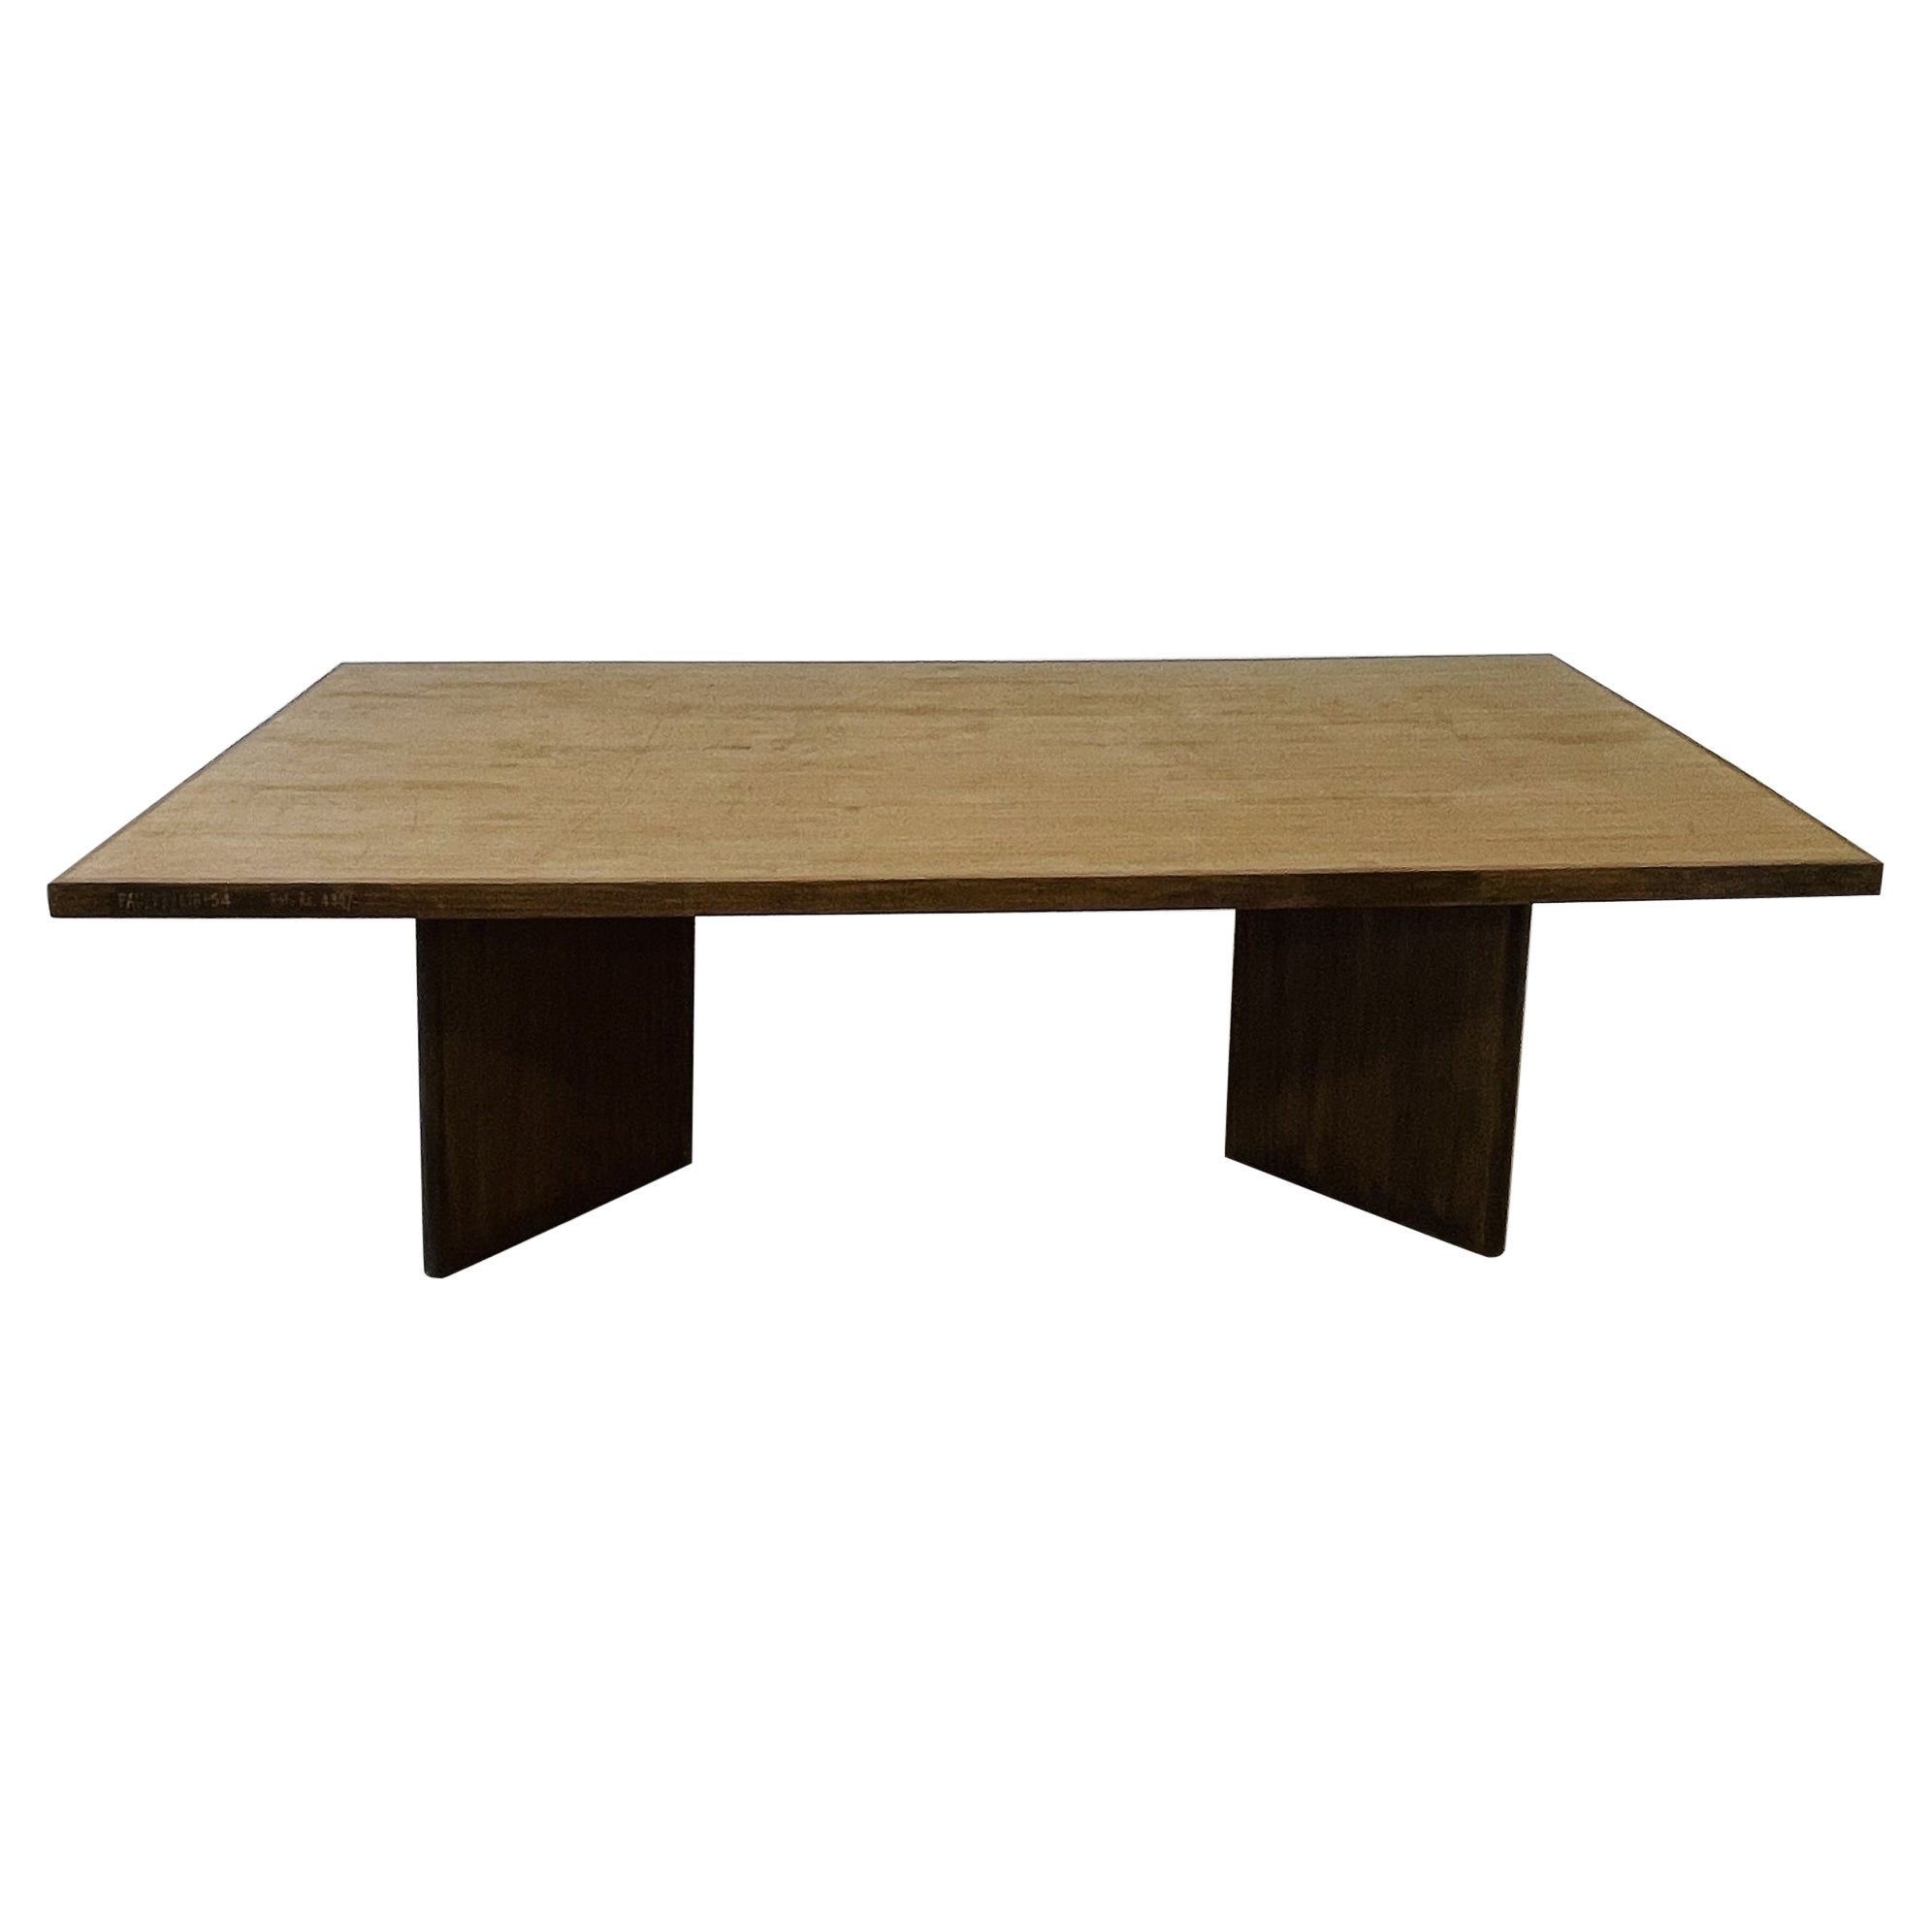 Pierre Jeanneret Library / Dining Table, Mid-Century Modern, Teak For Sale